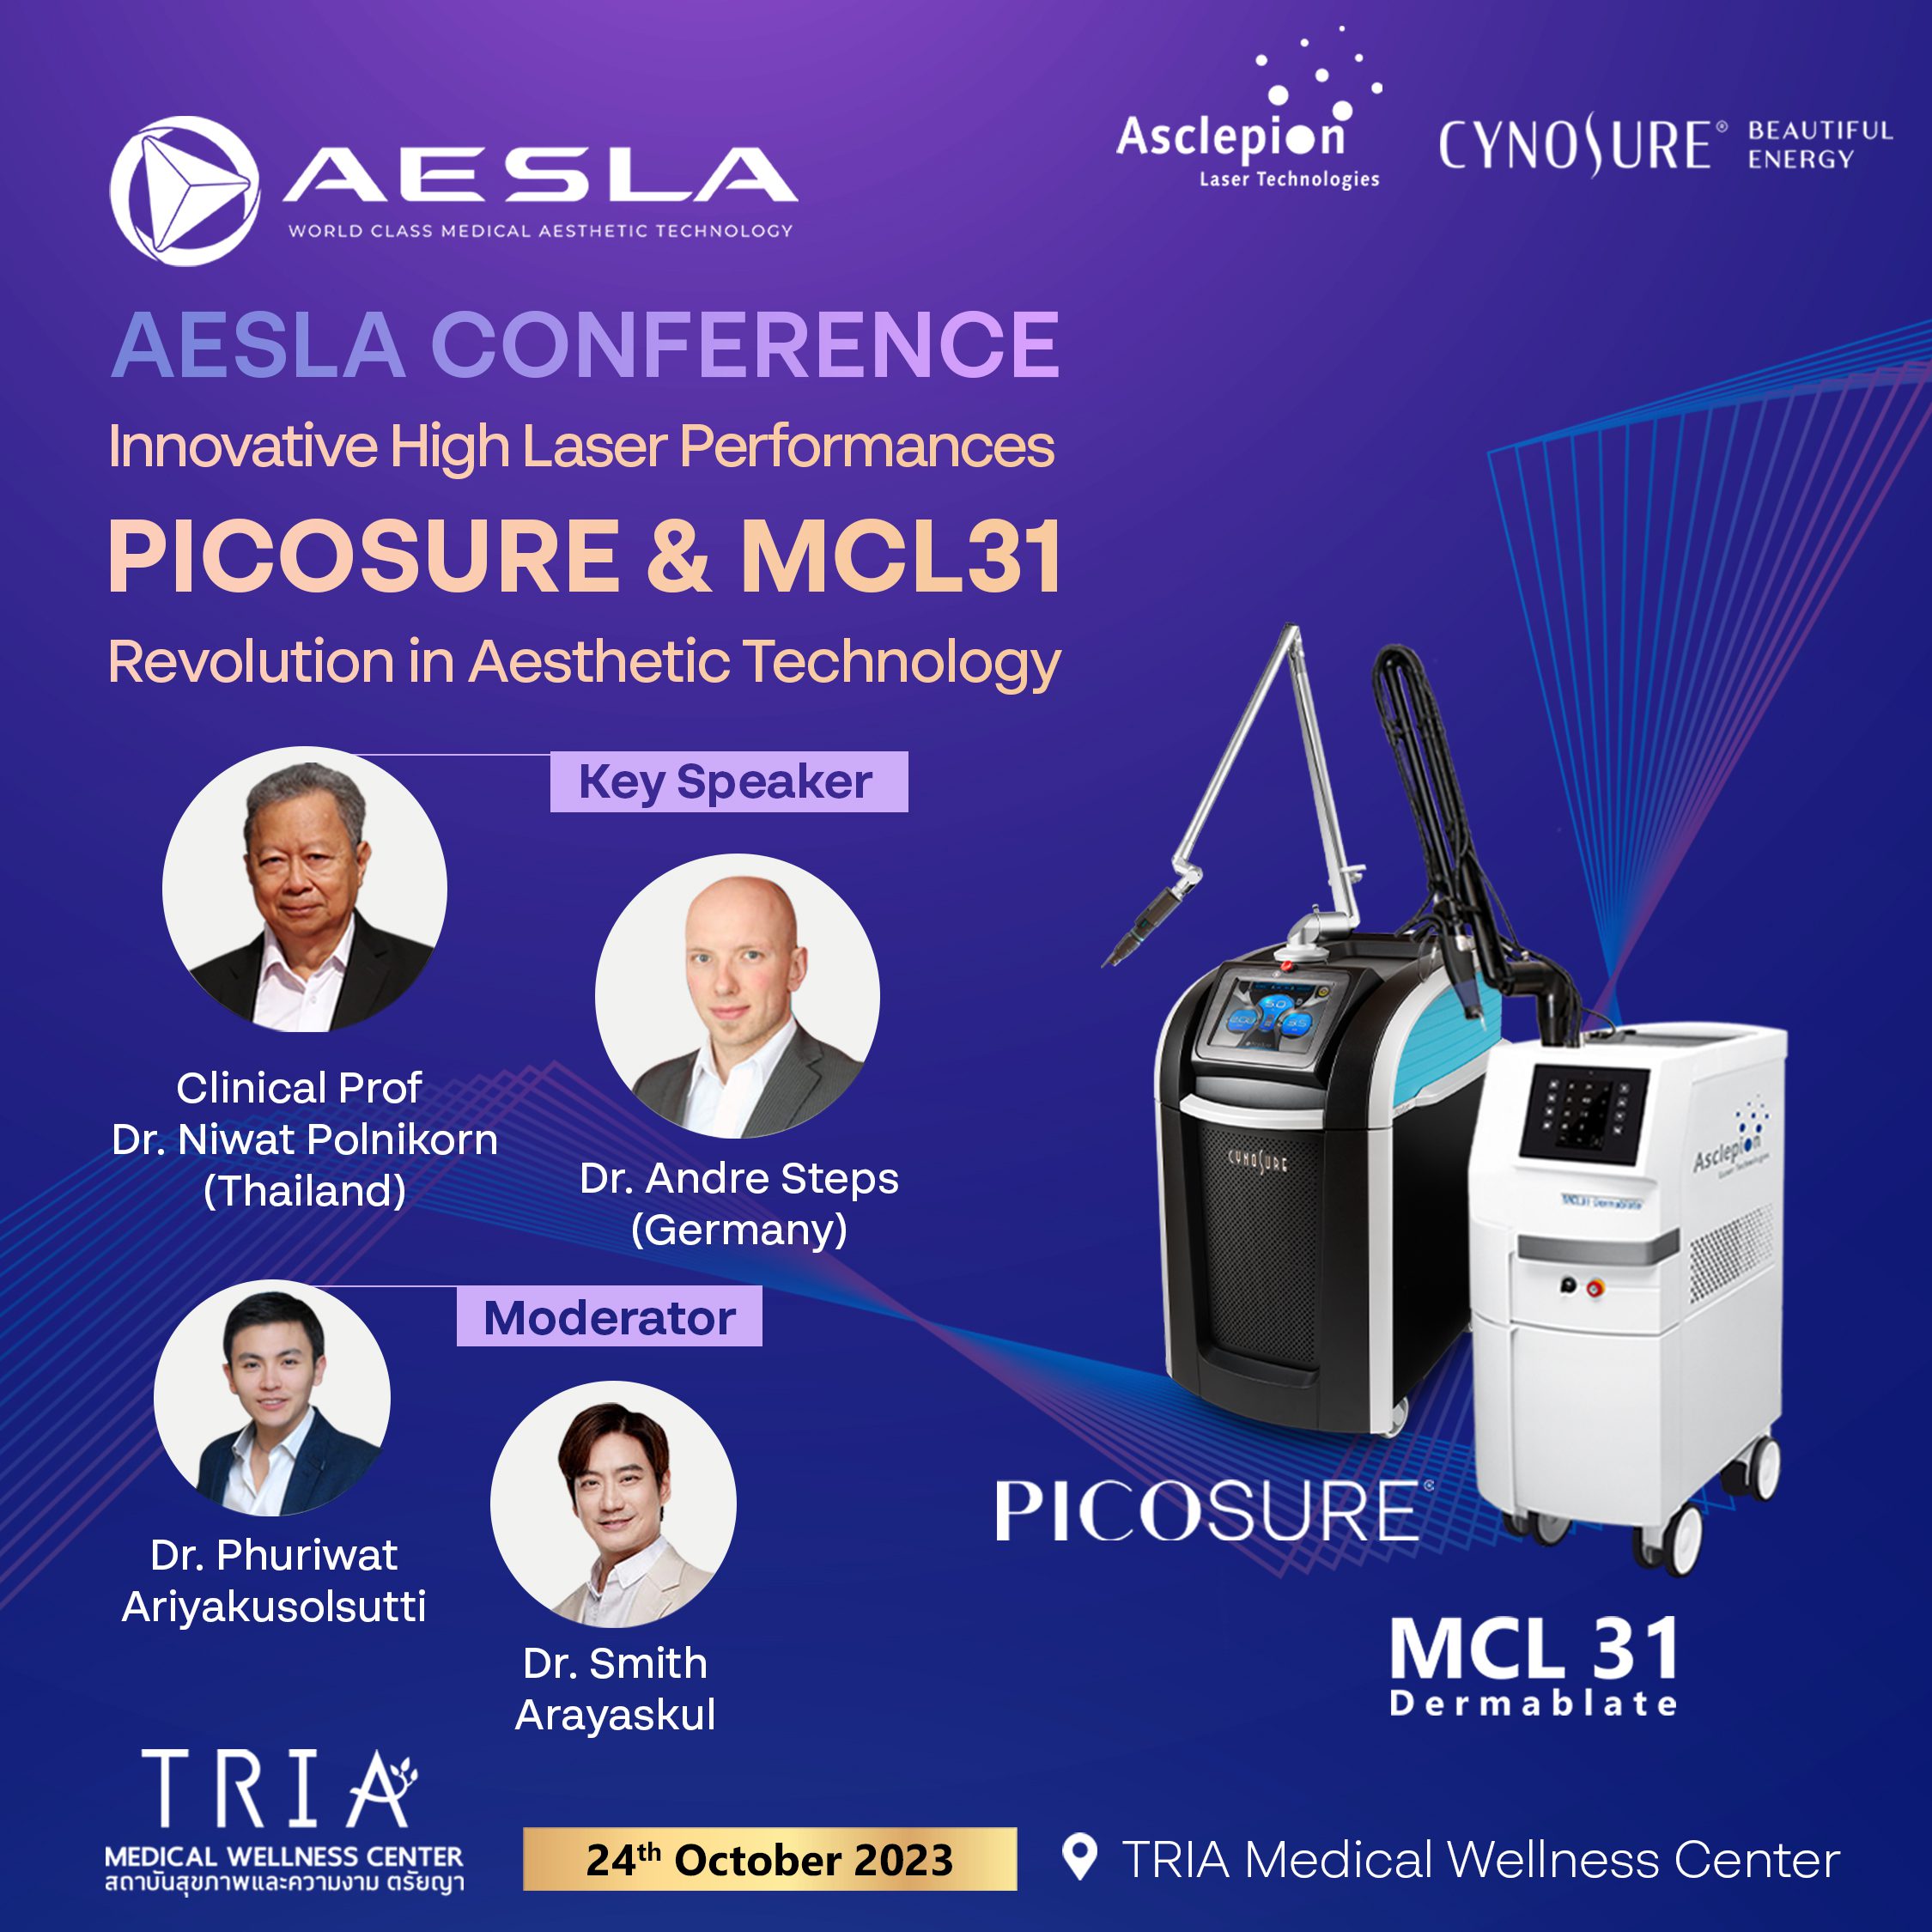 AESSLA Conference at TRIA Medical Wellness Center